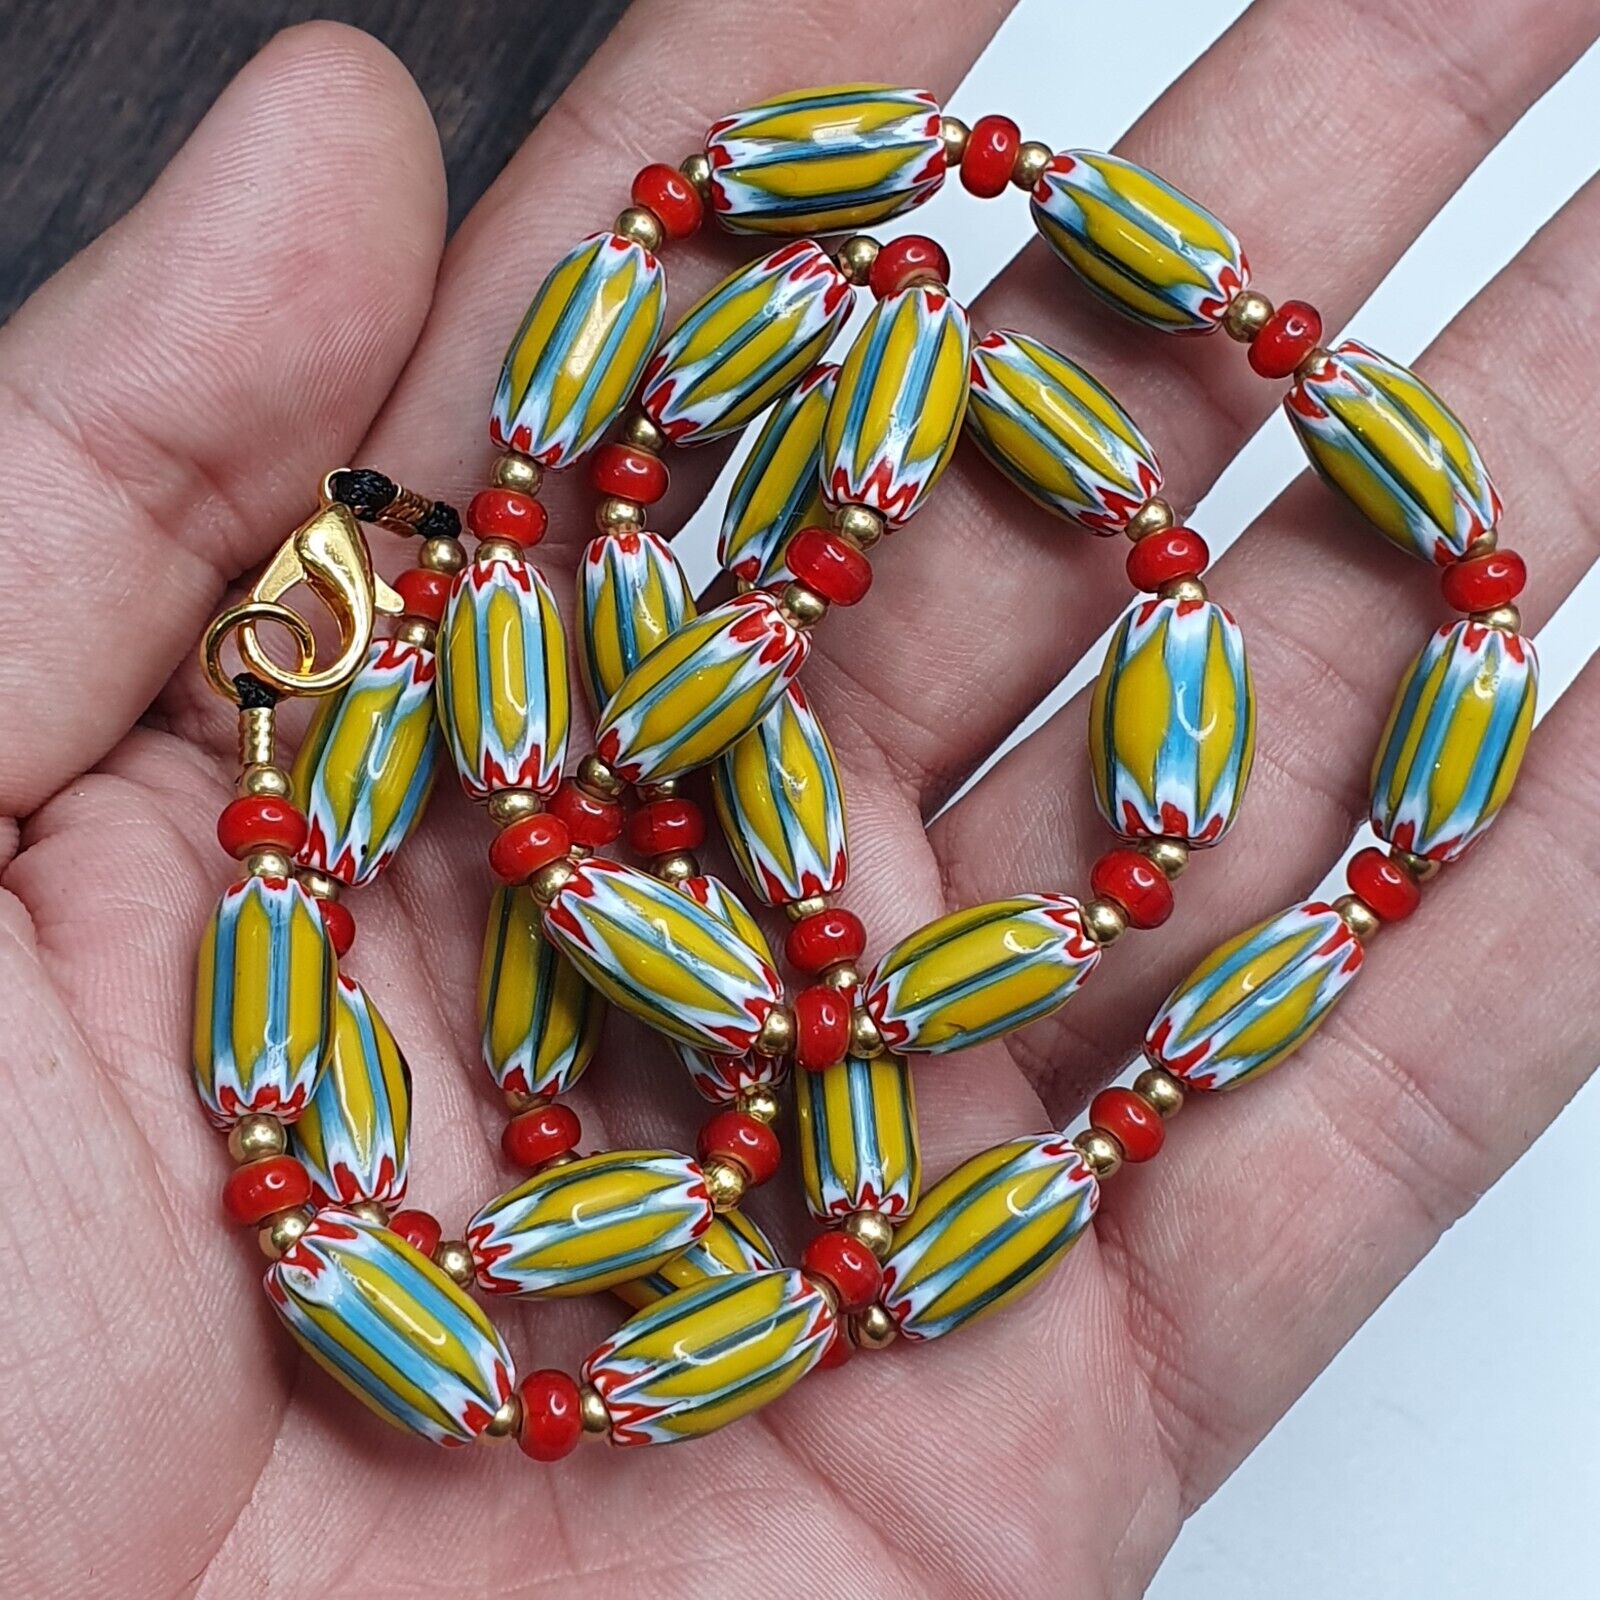 Vintage yellow Chevron whiteheart Trade beads Old African Beads Necklace